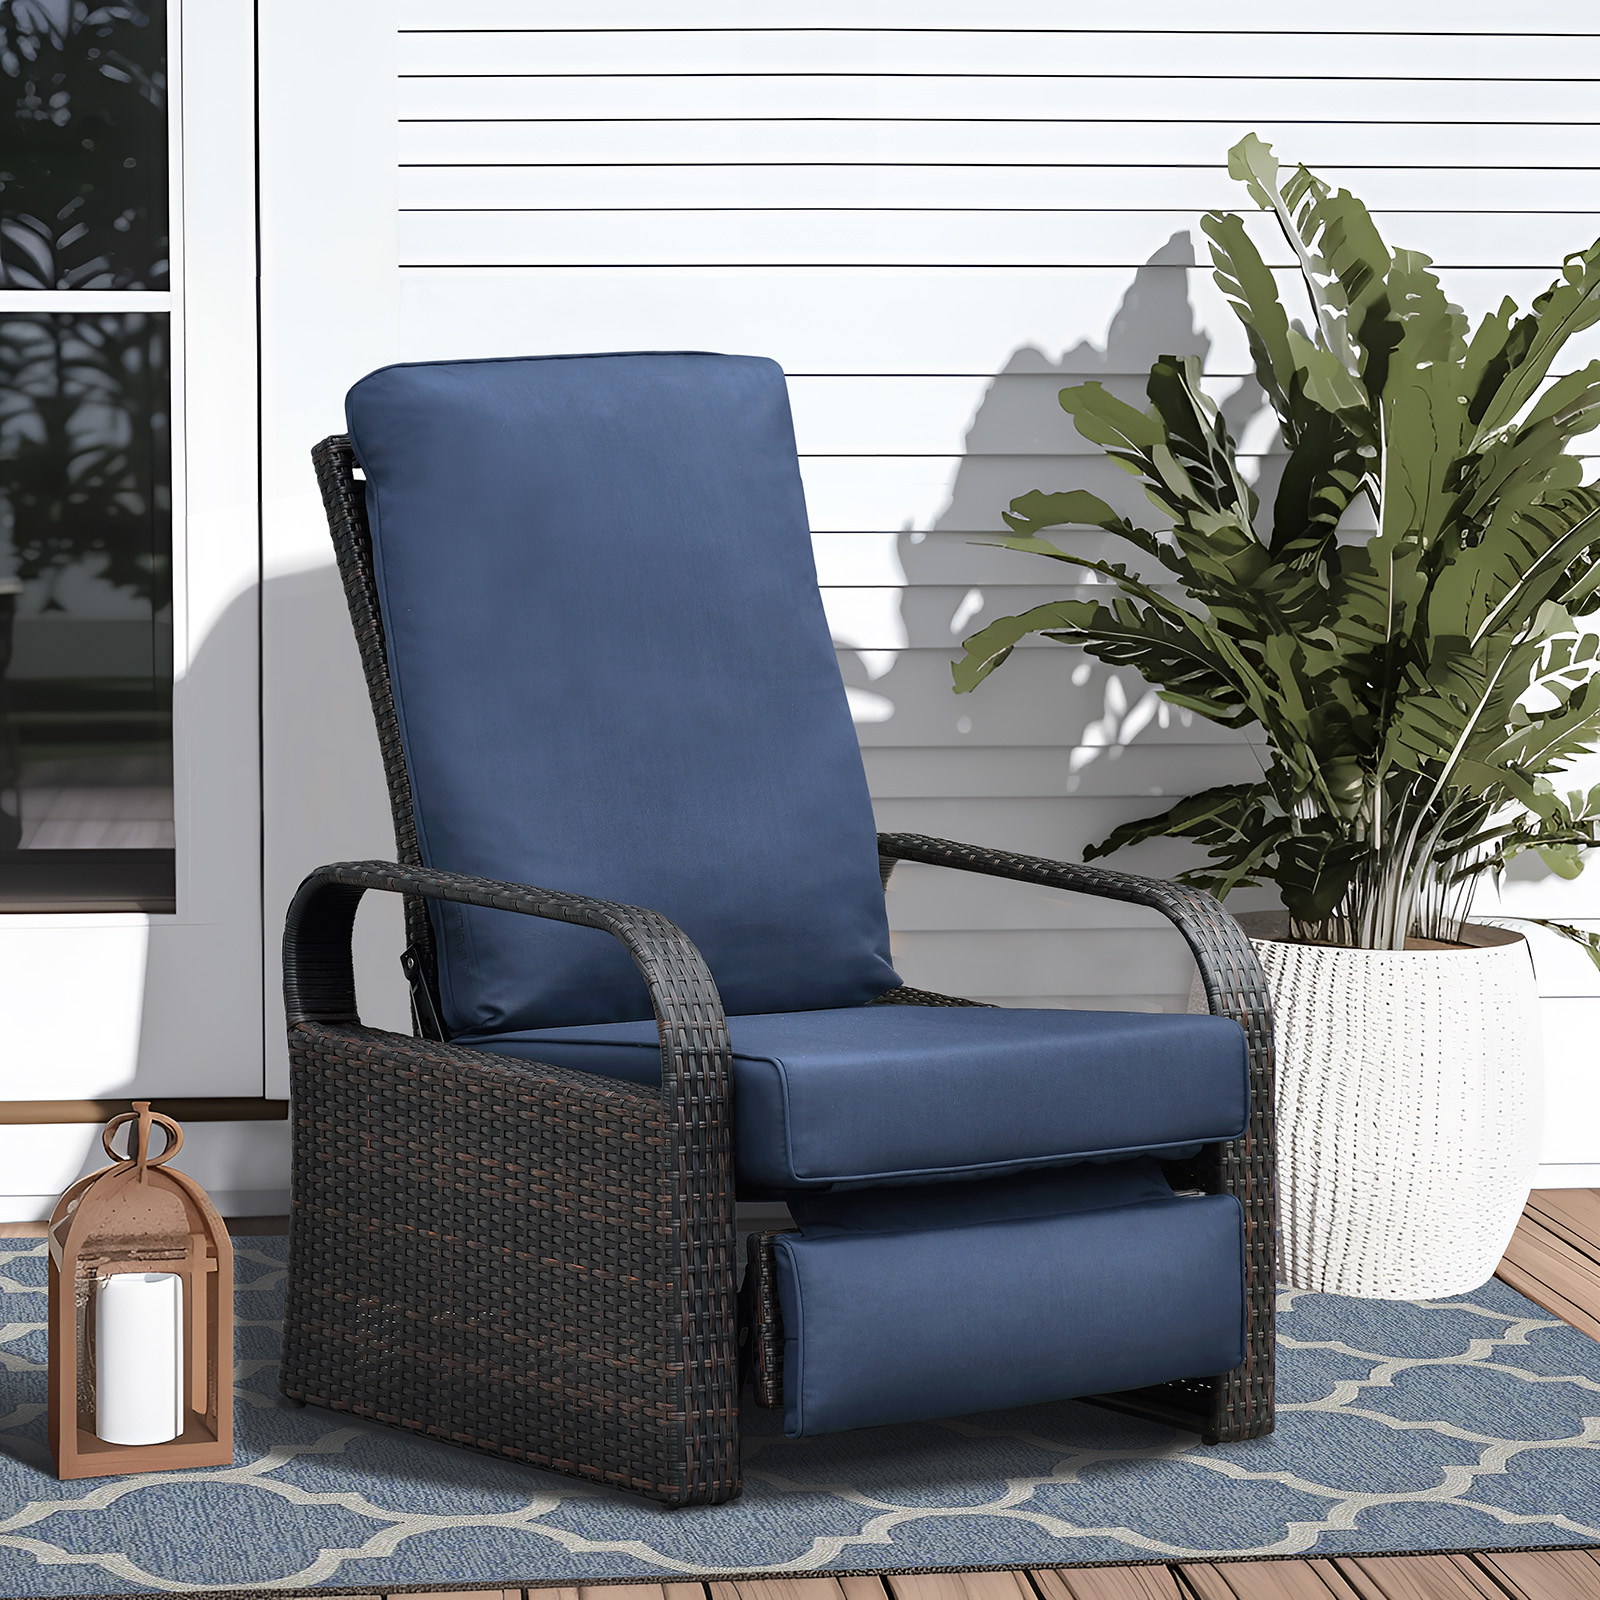 ATR ART to REAL Outdoor Patio Rattan Wicker Adjustable Recliner Chair with Cushion,Dark Blue - image 4 of 11